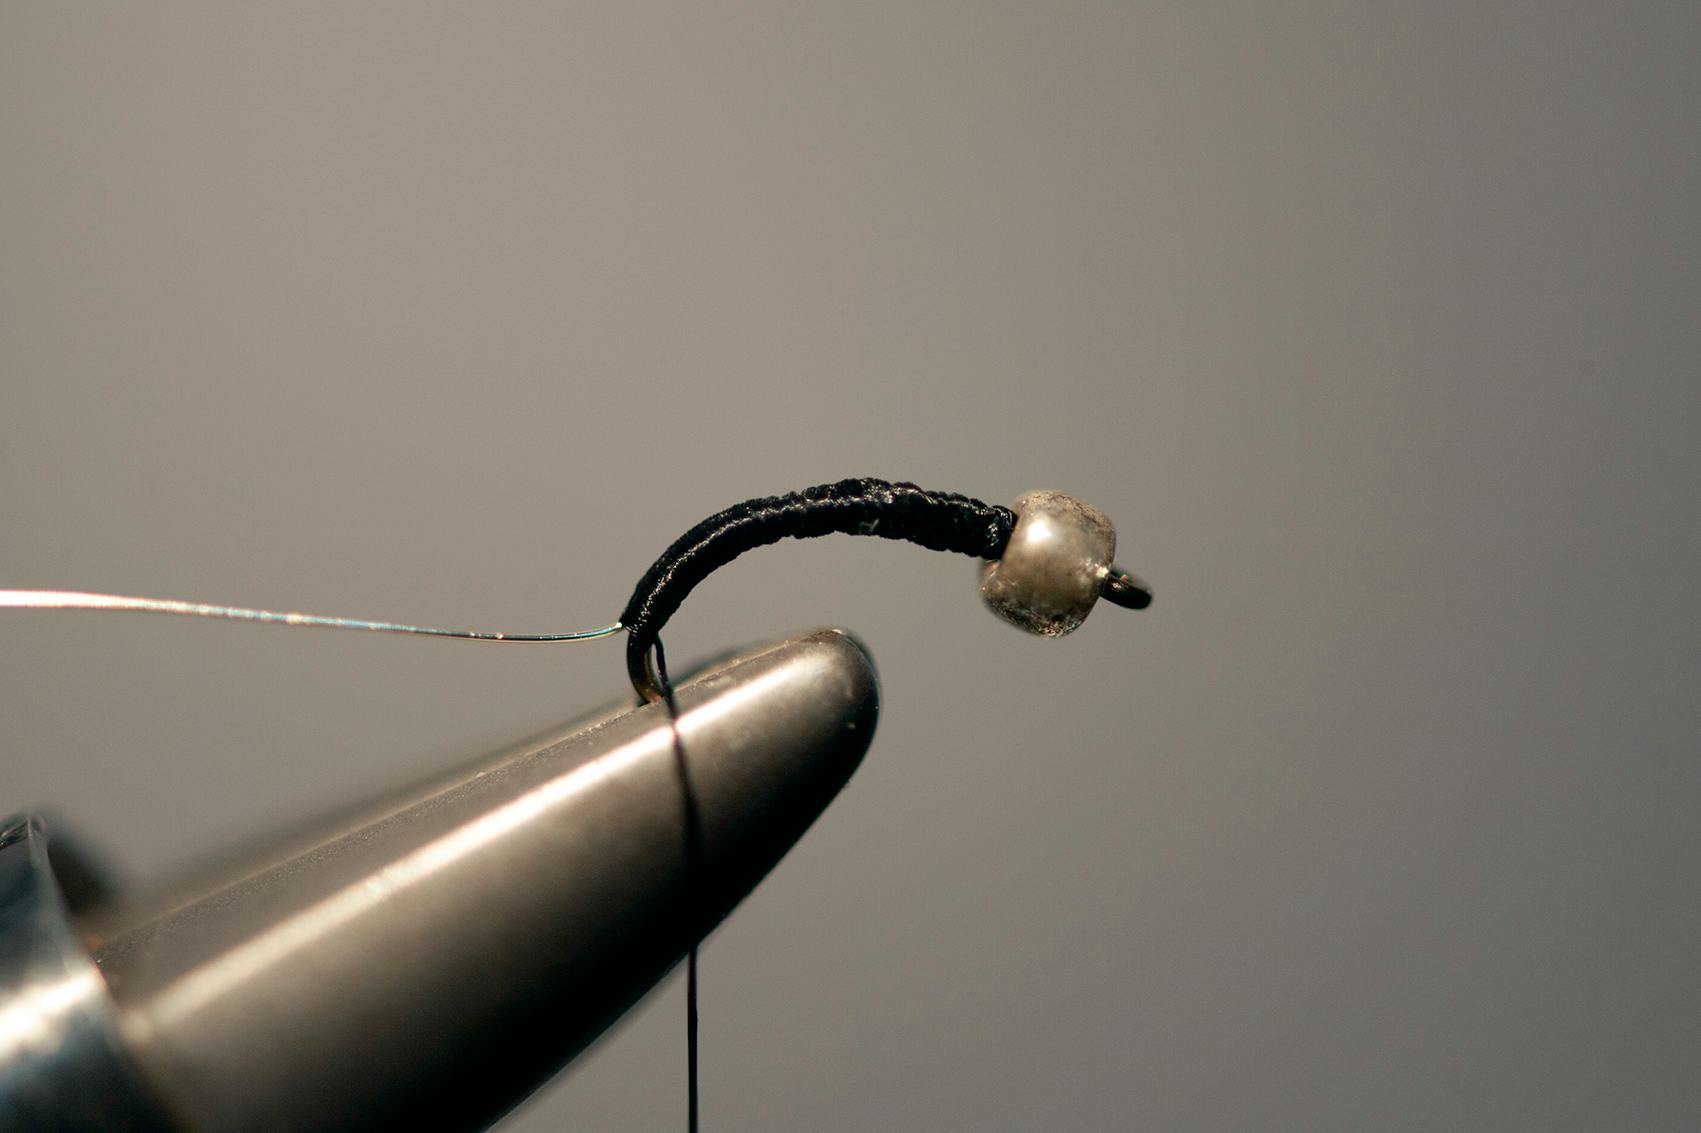 The same hook and bead and thread from above is pictured in the vice jaws but now there is even more thread and the fly looks almost complete. 